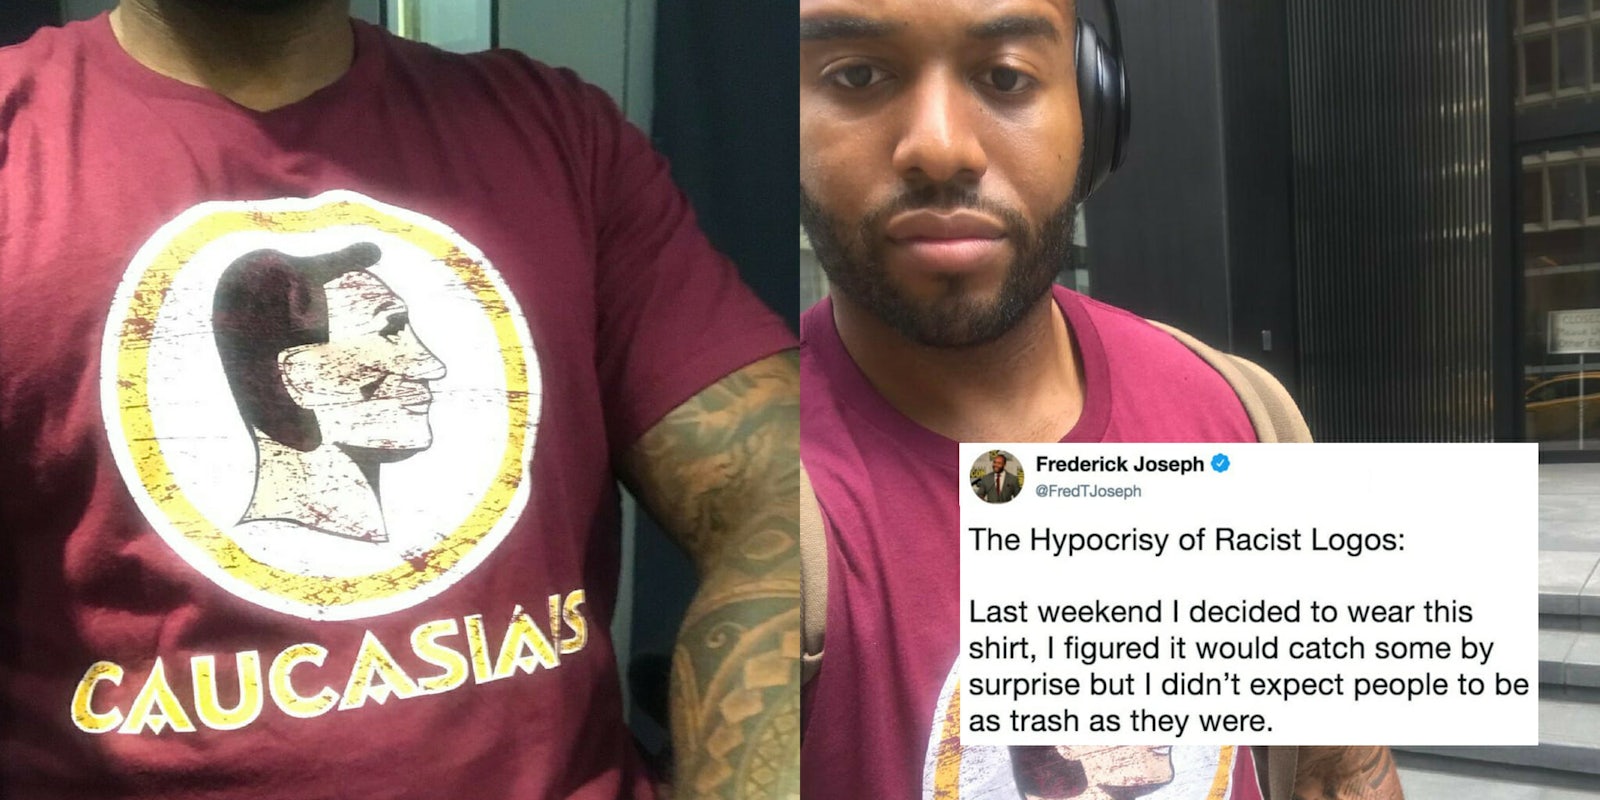 A man swapped the offensive 'Redskins' football logo with 'Caucasians' on a T-shirt.